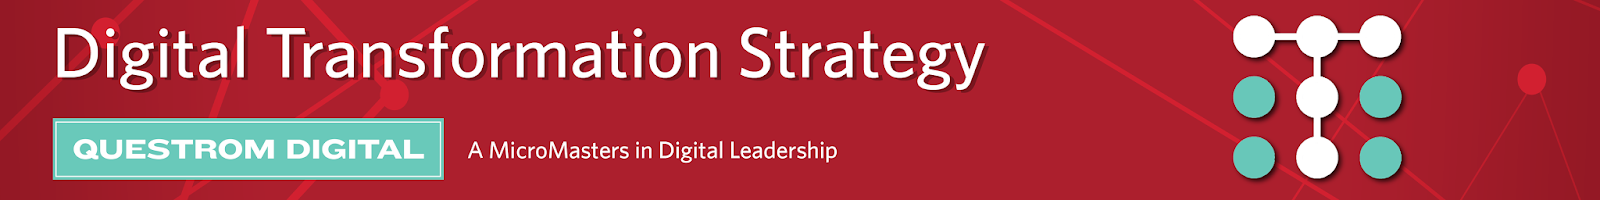 Digital Transformation Strategy course banner